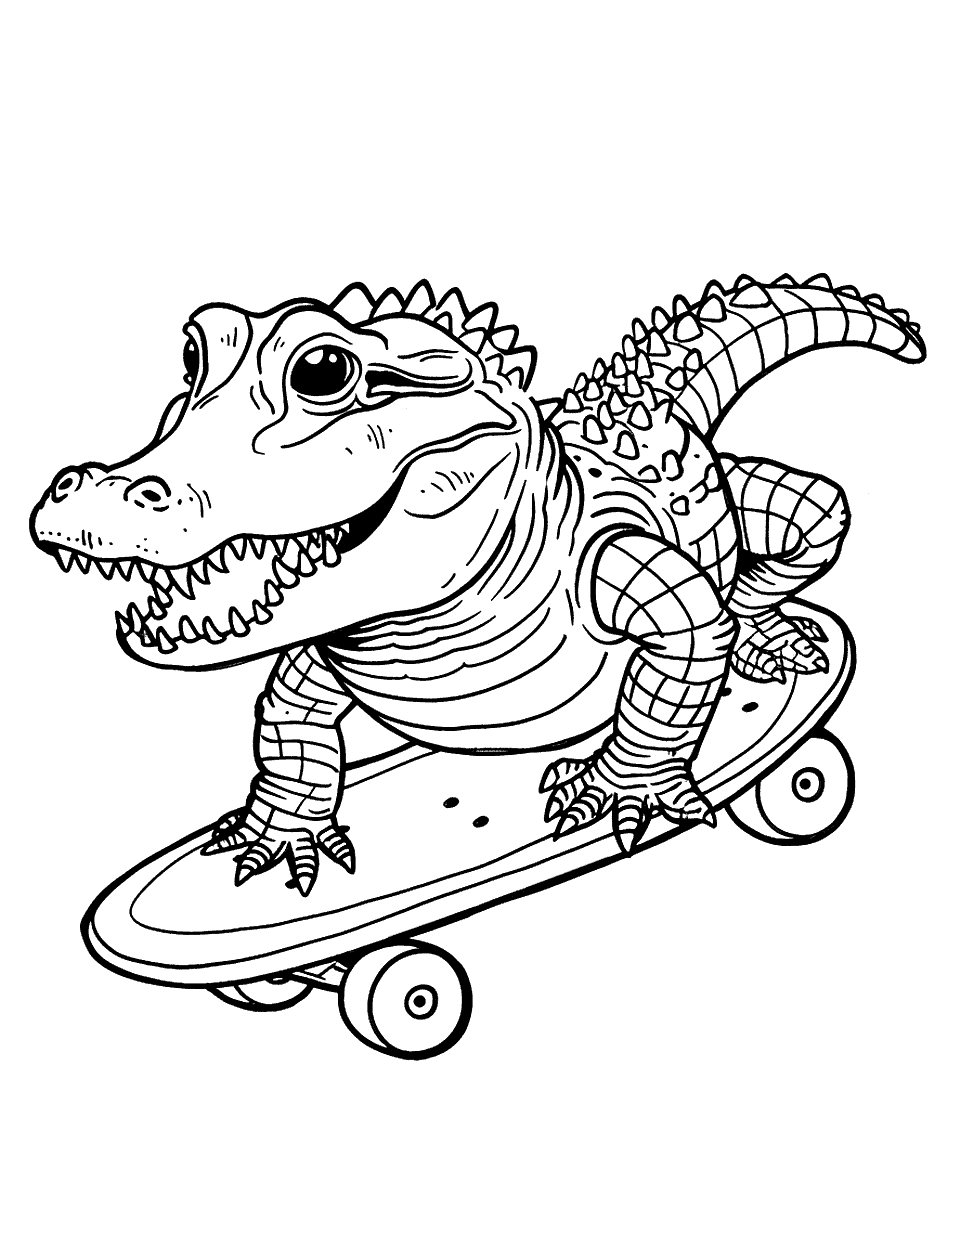 Alligator Riding a Skateboard Coloring Page - An alligator doing a cool trick on a skateboard.